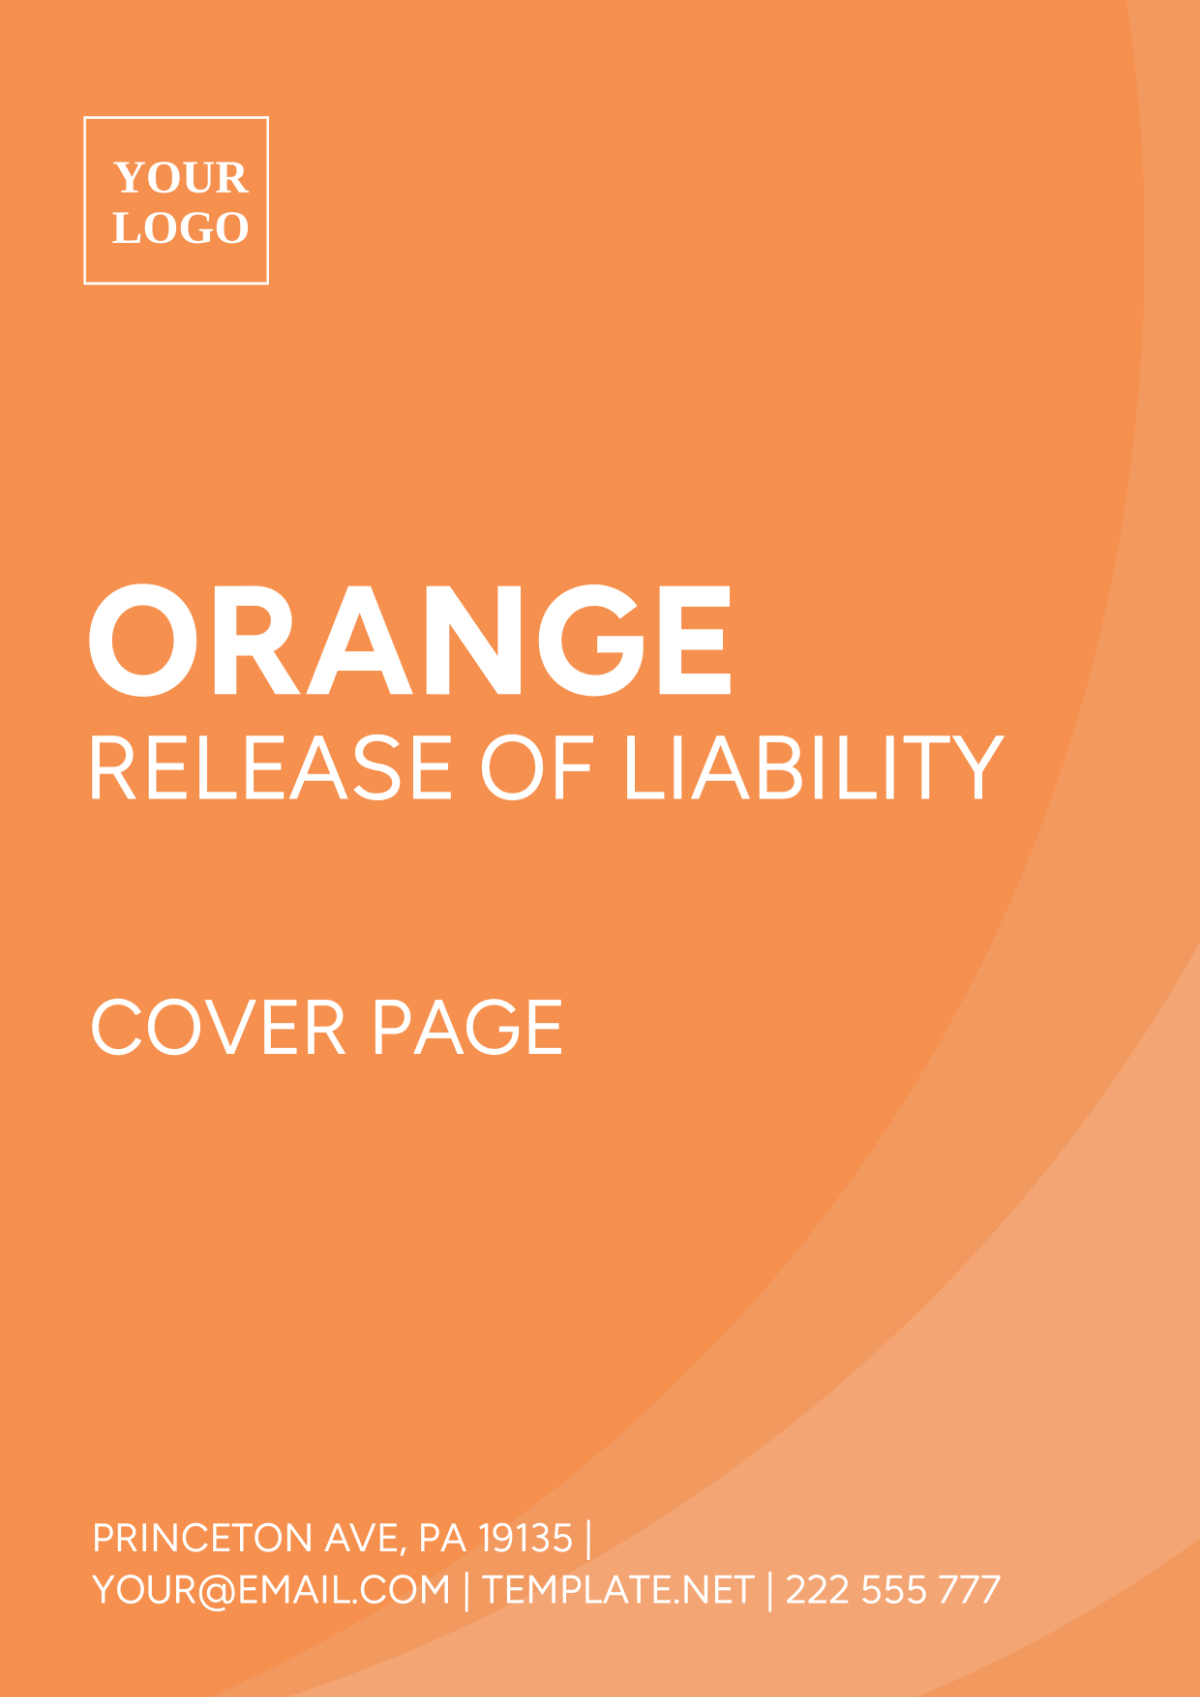 Orange Release of Liability Cover Page